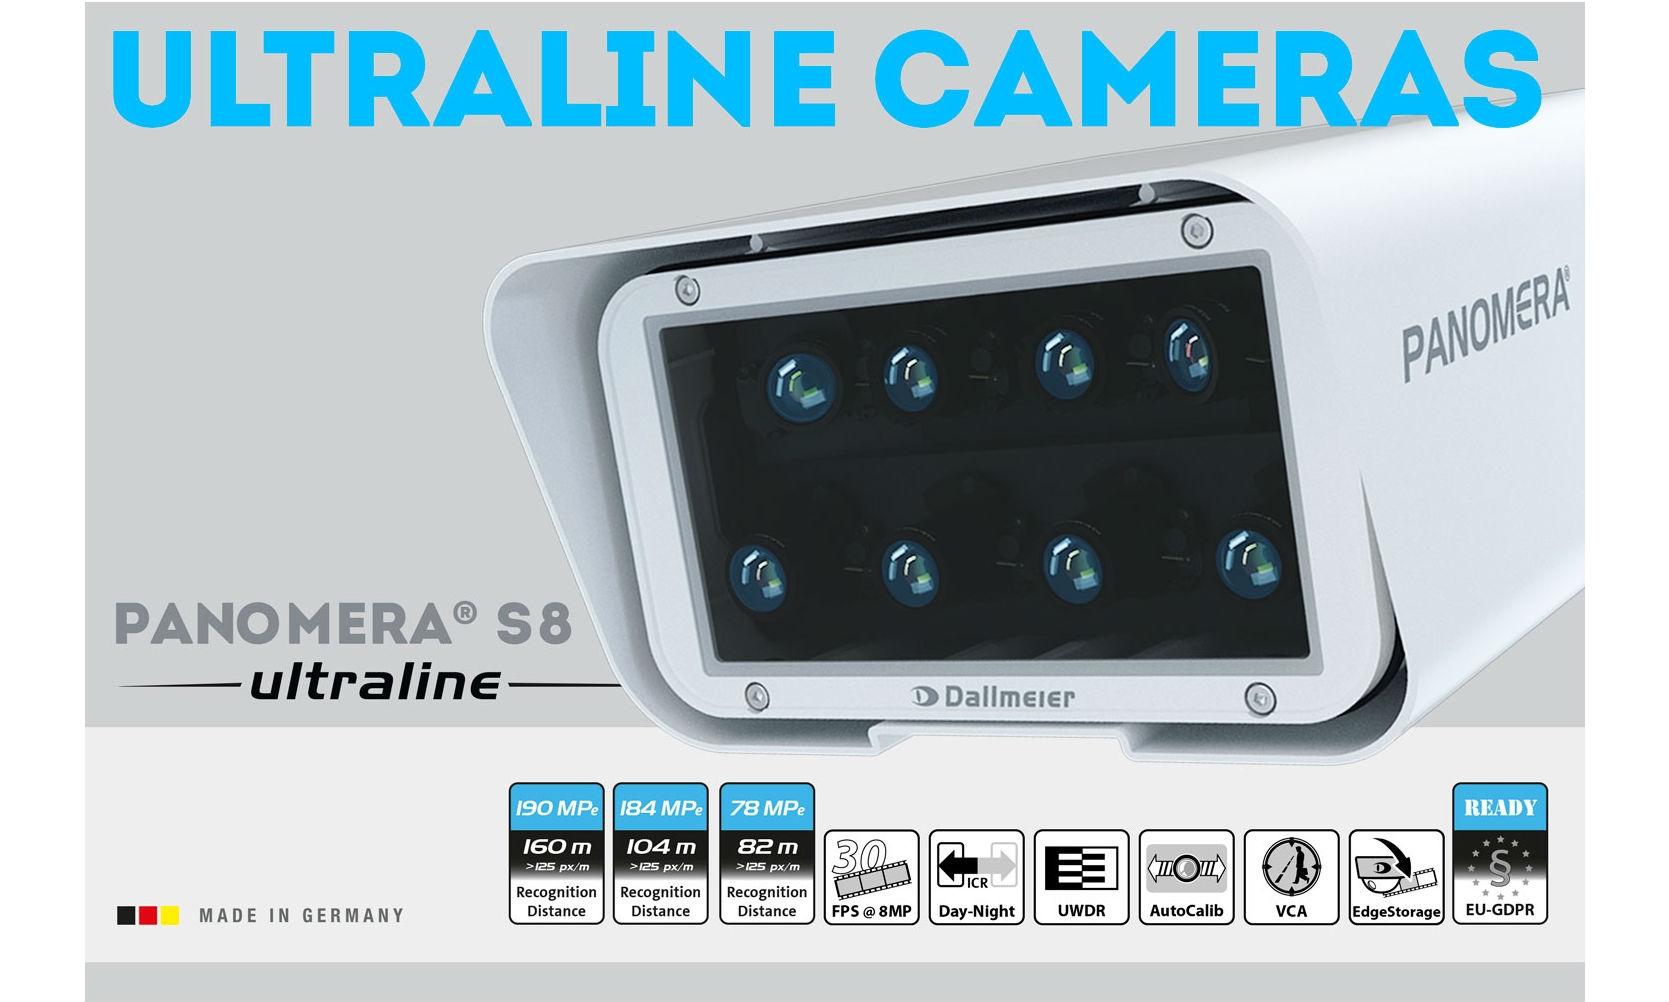 Dallmeier sets another record for resolution and dynamic range with the new Panomera® S8 Ultraline